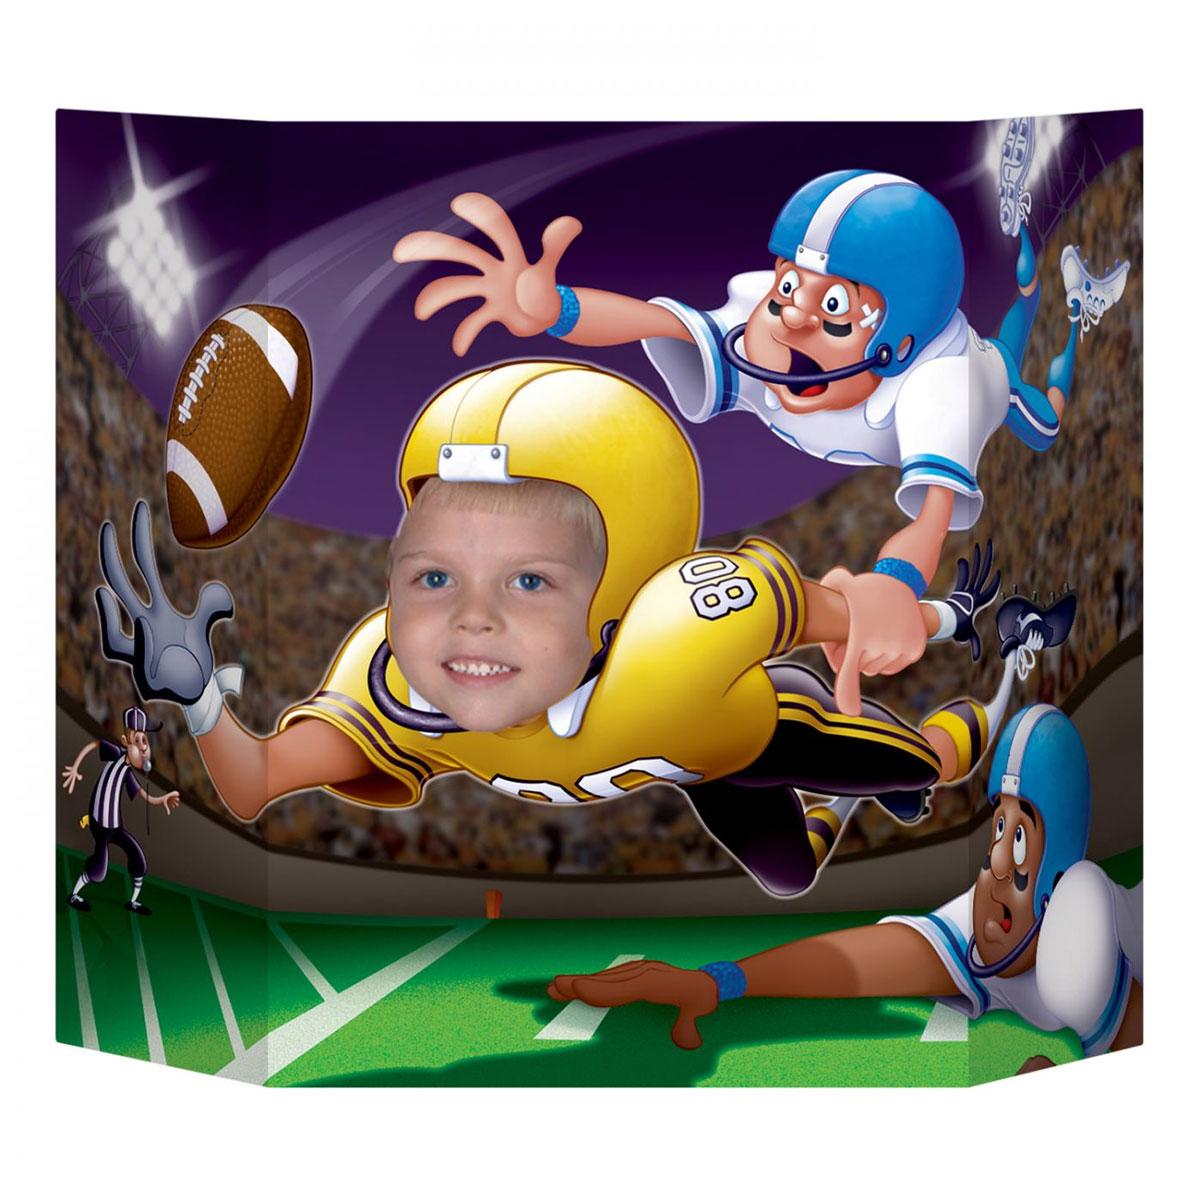 NFL American Football Photo Prop by Beistle 57967 avaiable from a large selectionof NFL SUperbowl party items and decorations here at Karnival Costumes online party shop